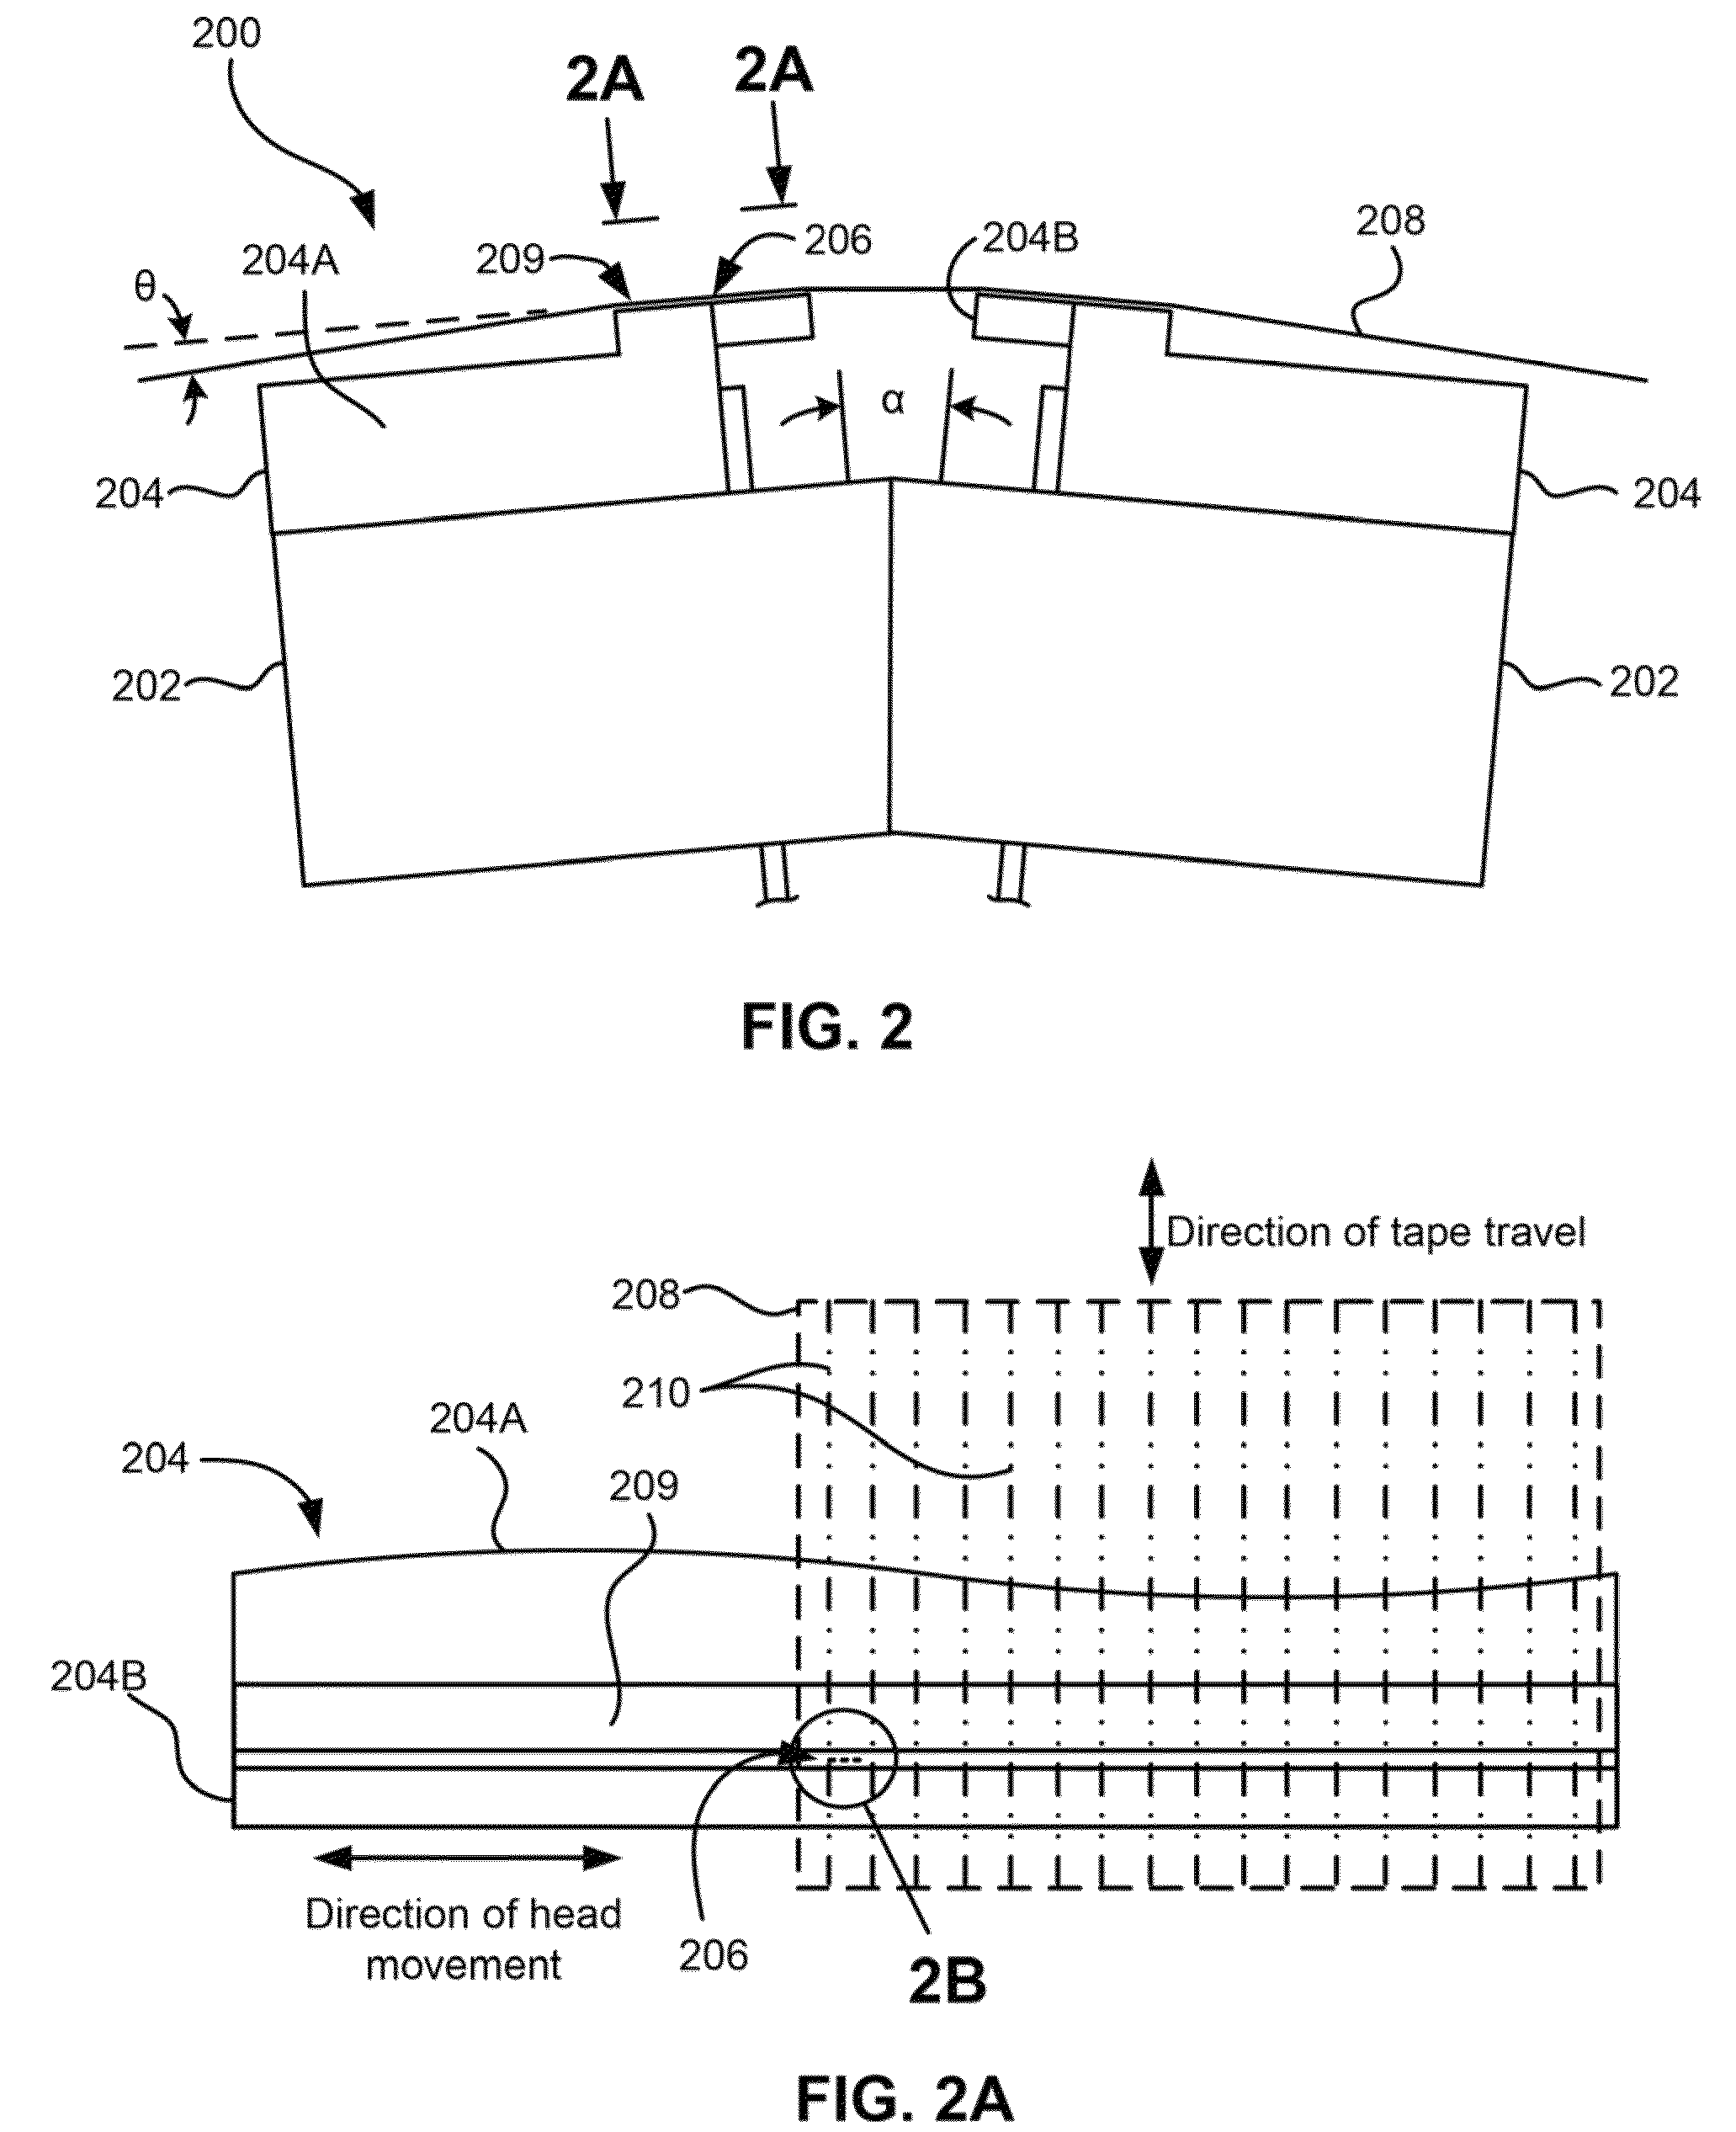 Hierarchical control of tiered error recovery for storage devices